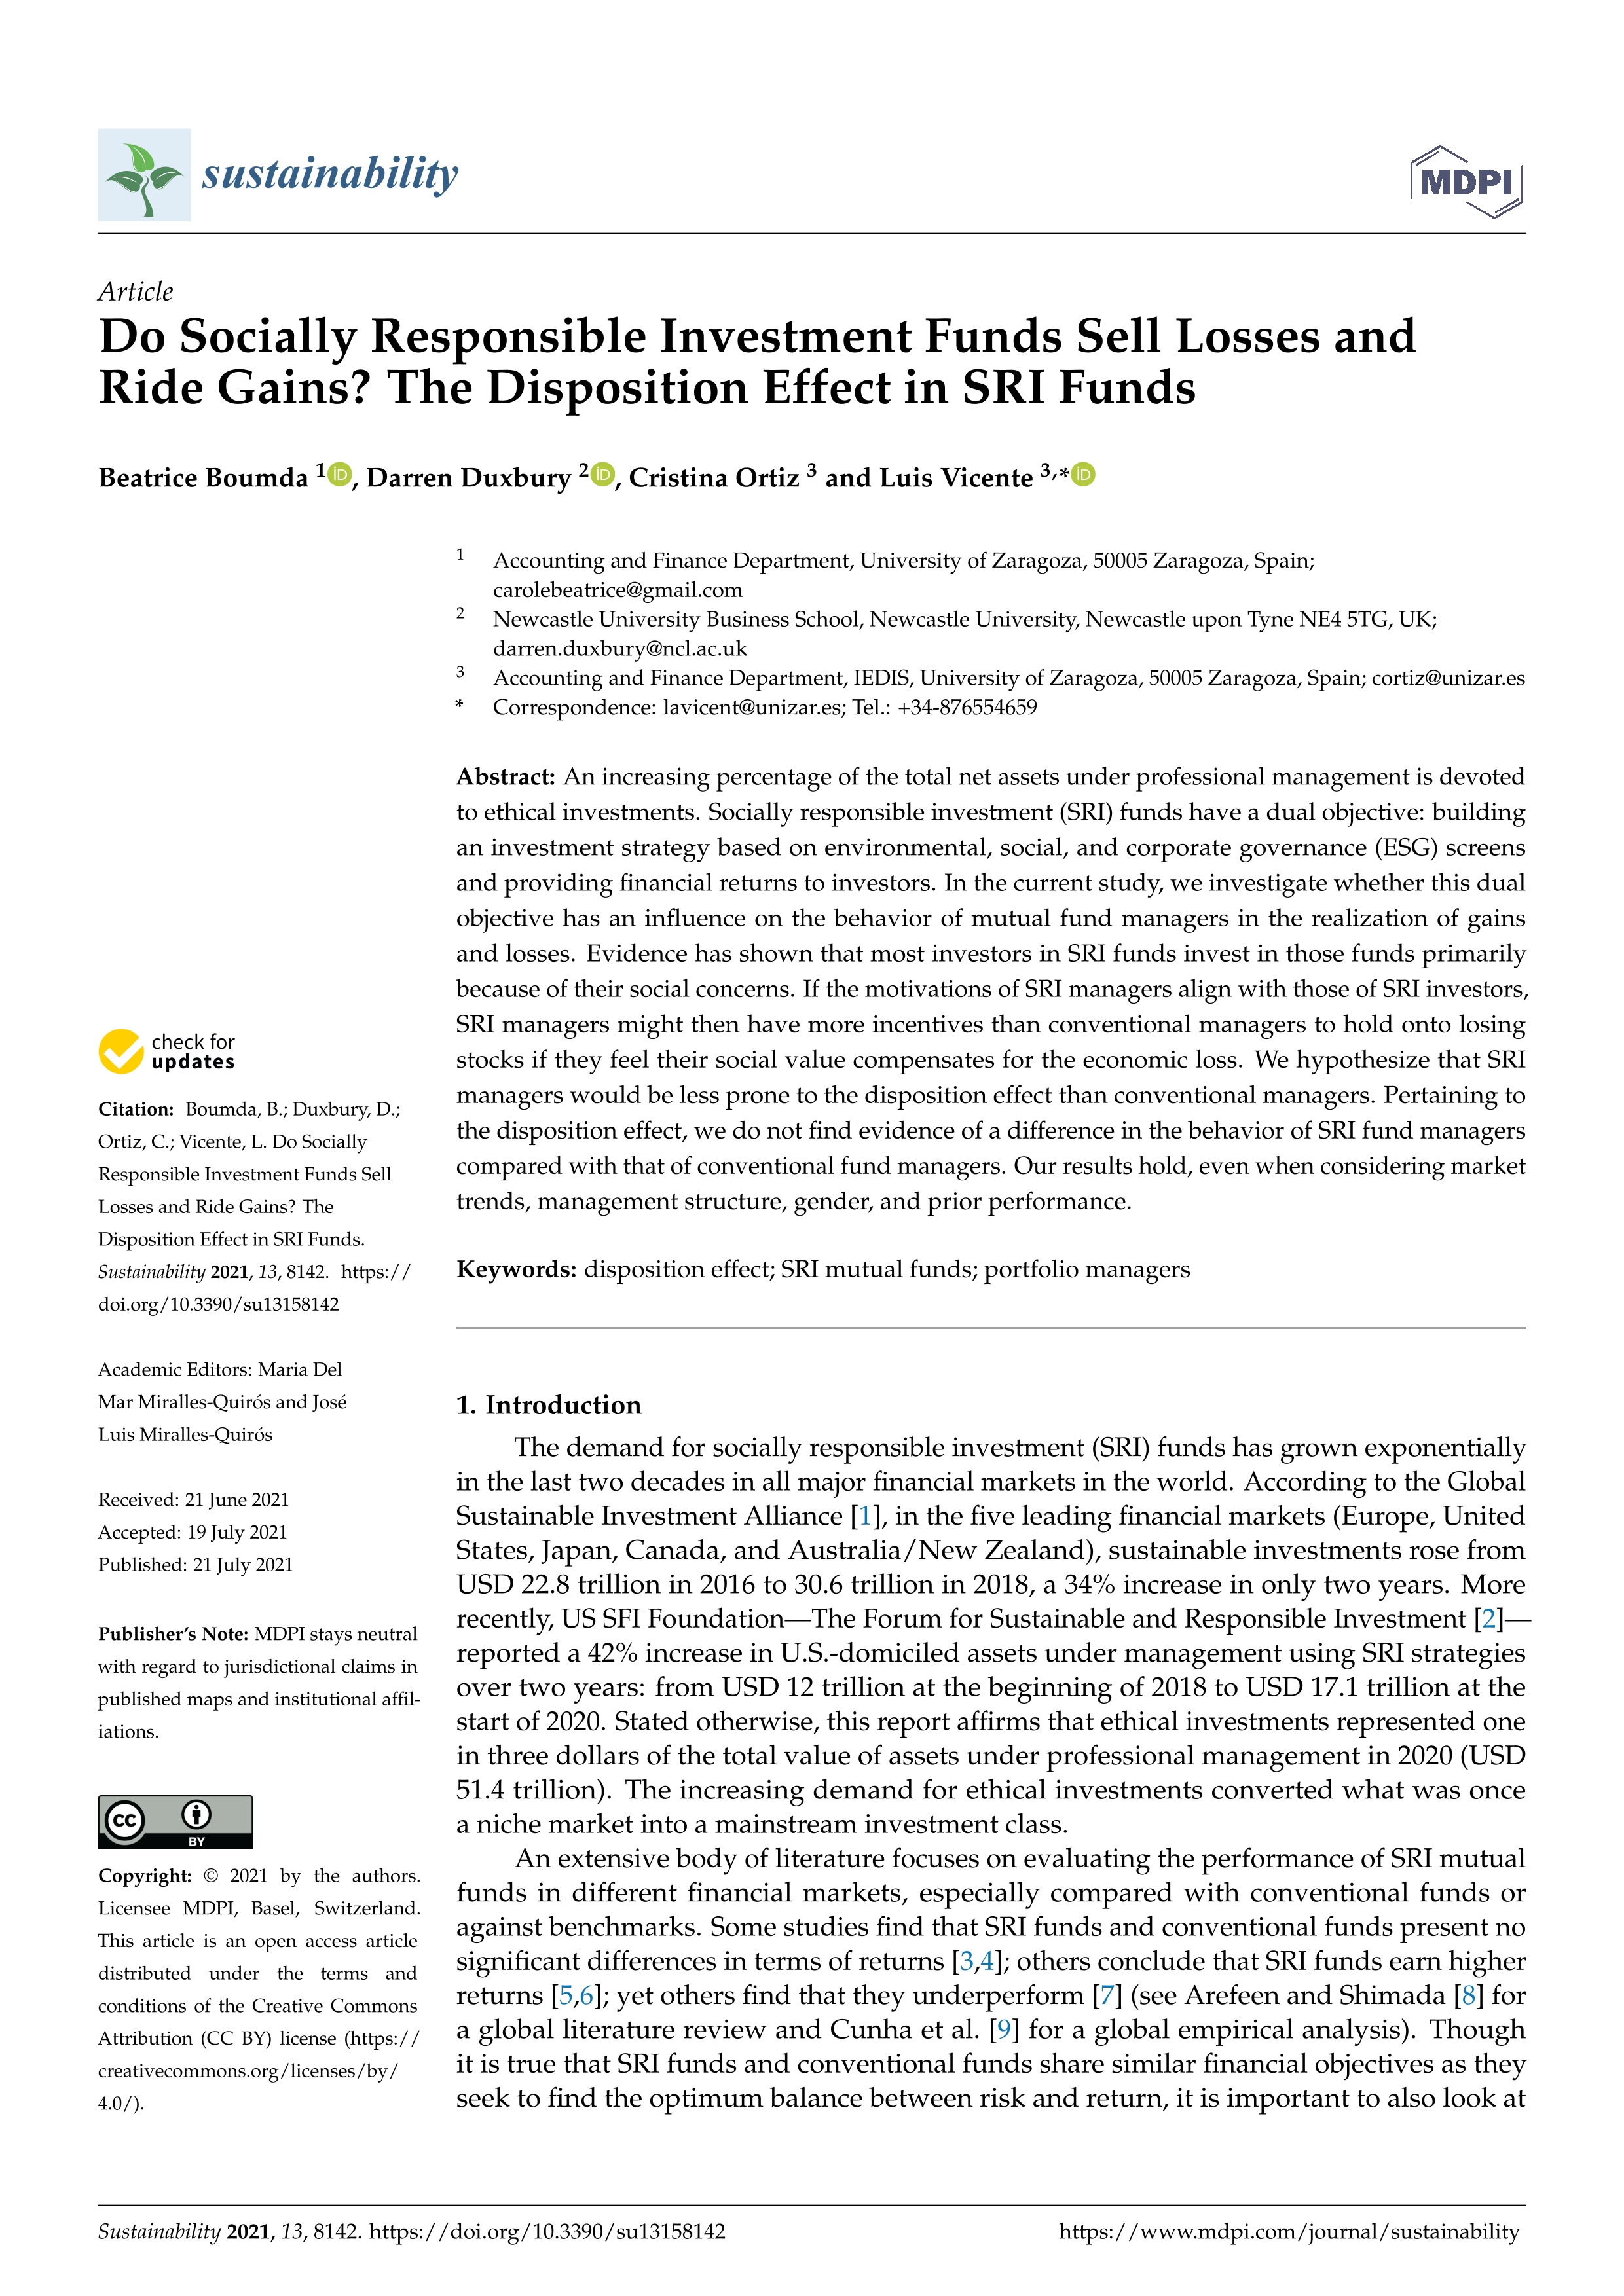 Do socially responsible investment funds sell losses and ride gains? The disposition effect in SRI funds